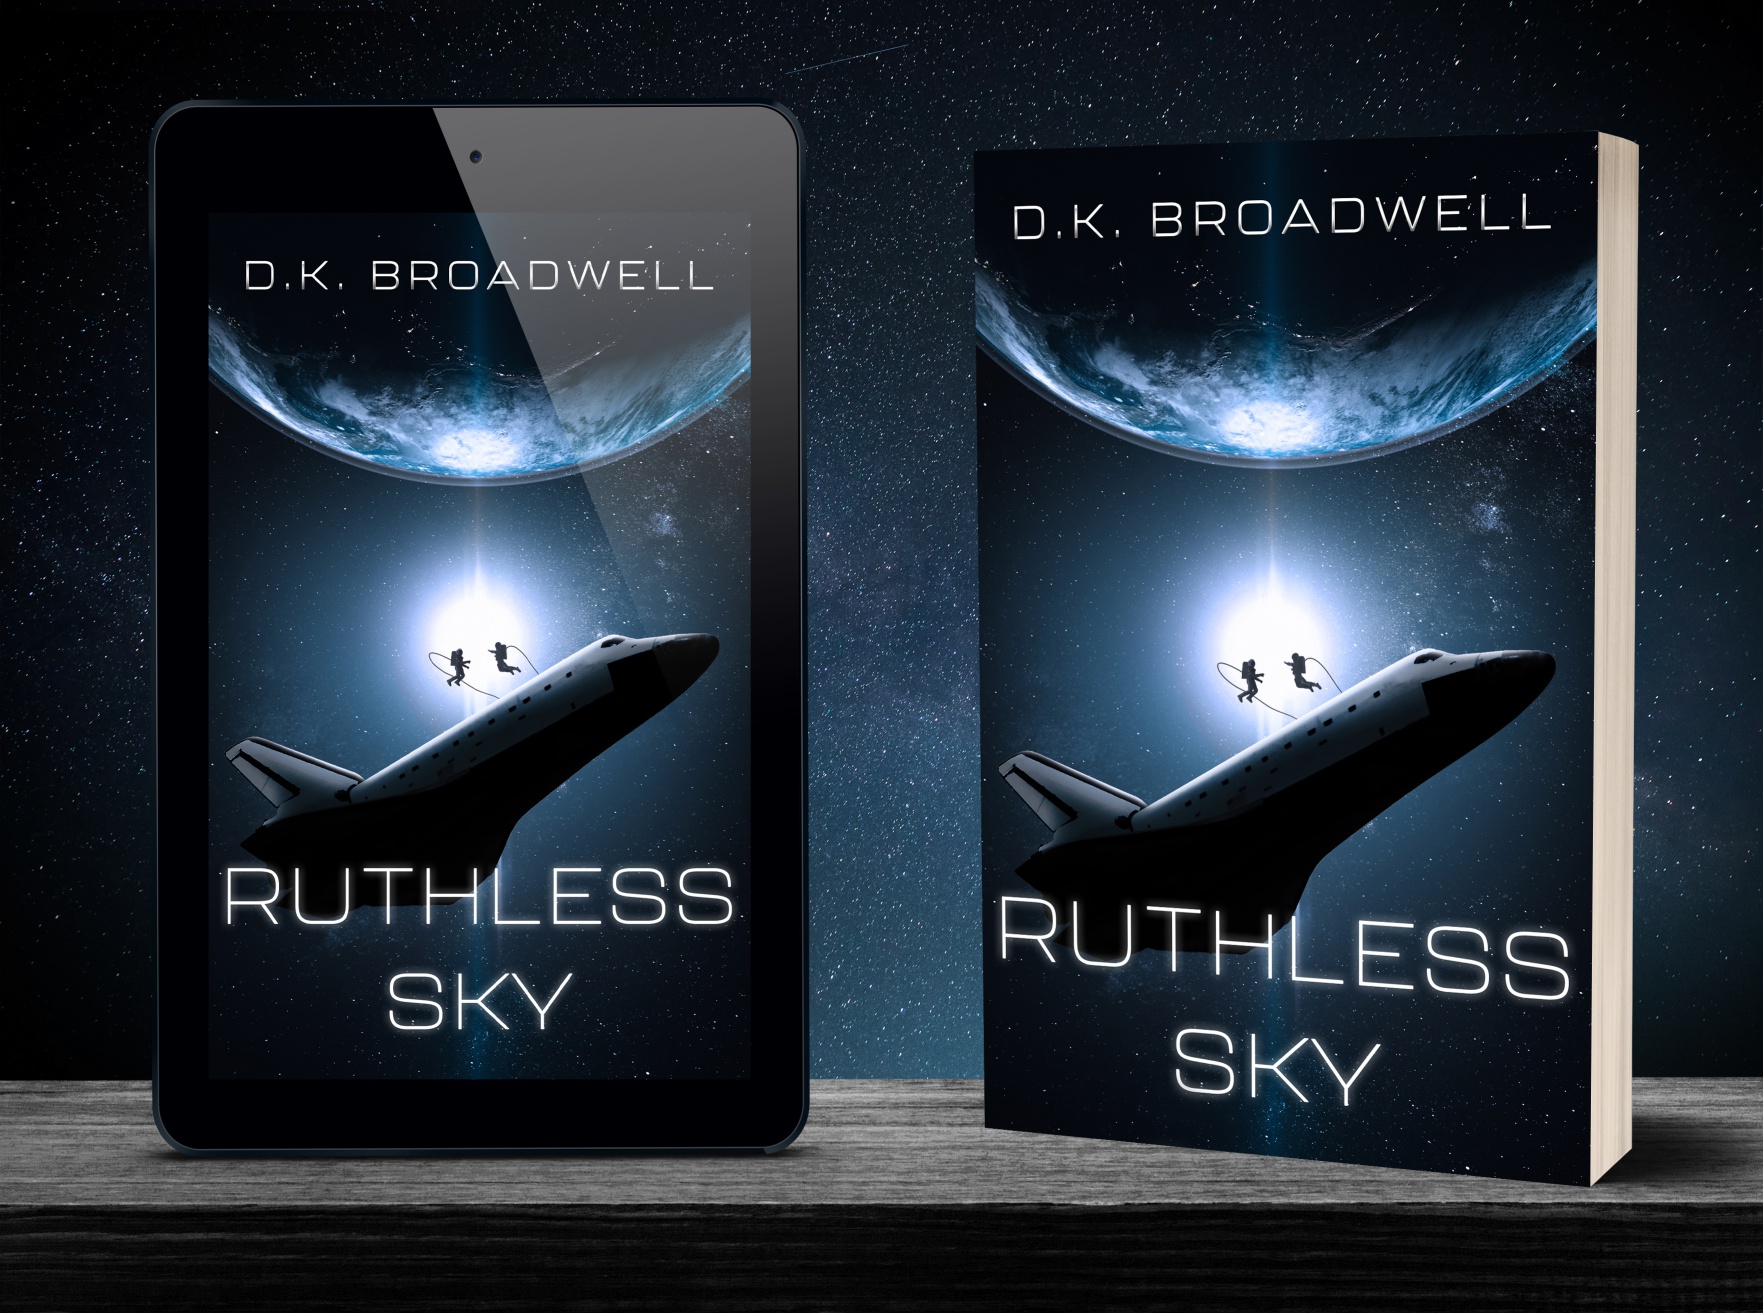 A 3D Mockup of the printed Ruthless Sky novel next to a tablet with the eBook version of the novel.